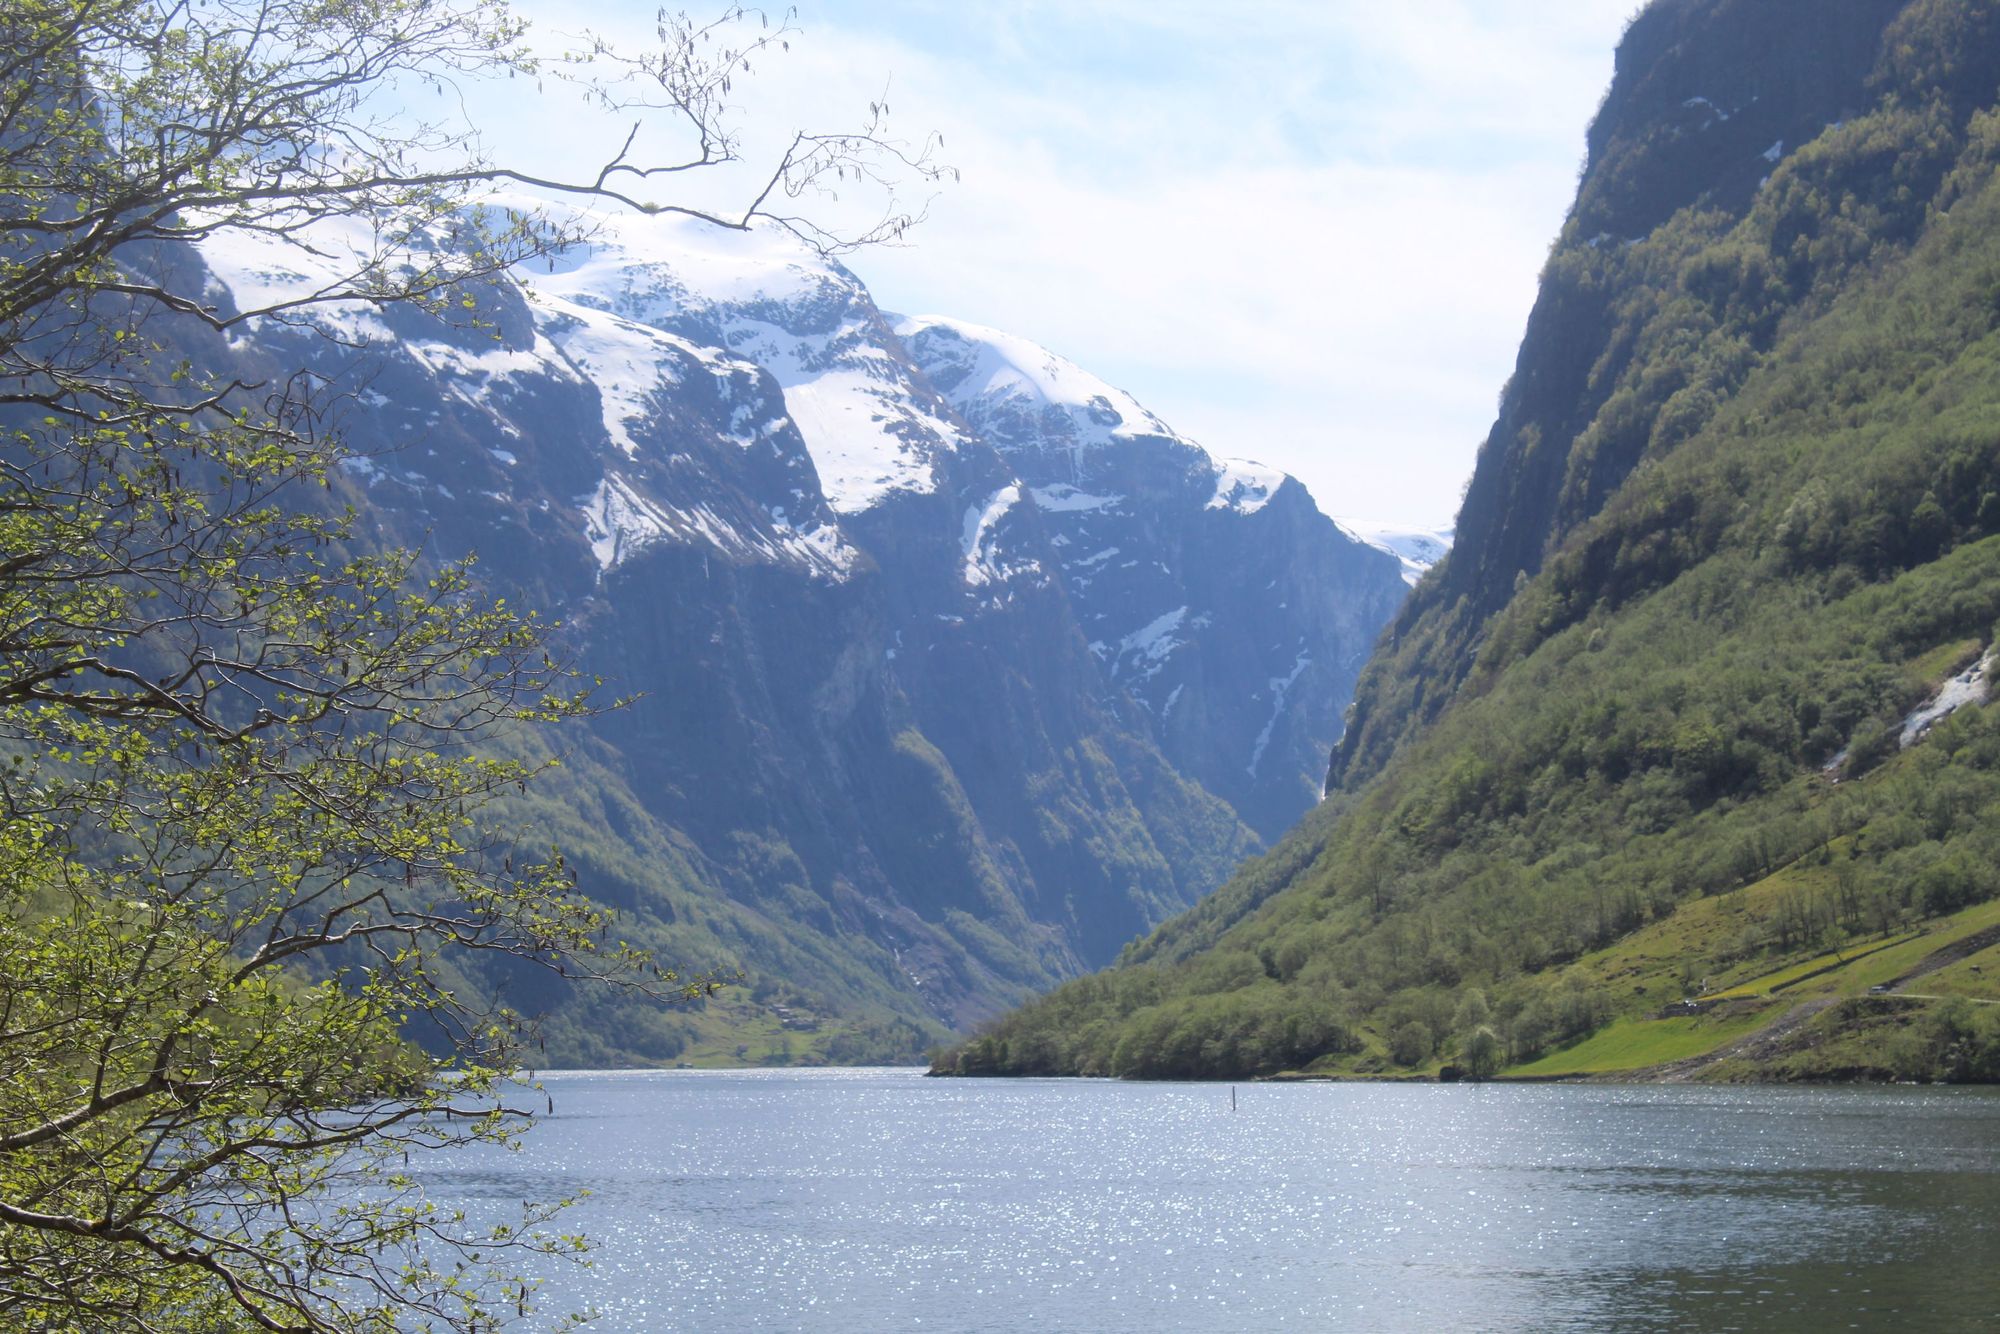 The Naeroyfjord, a fjord in Norway